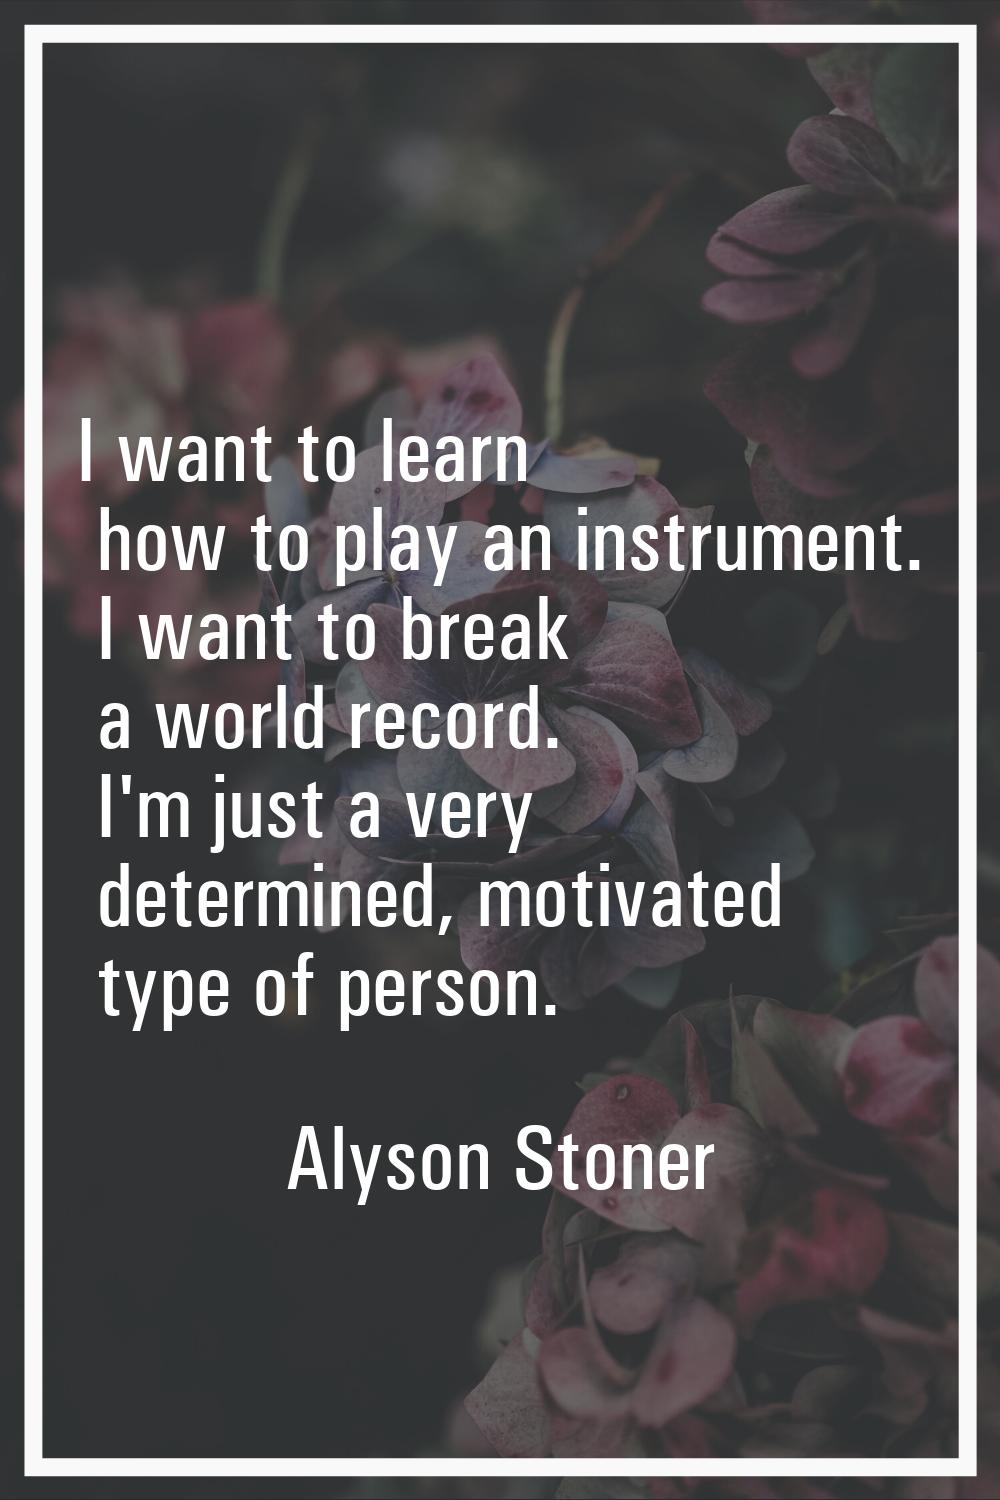 I want to learn how to play an instrument. I want to break a world record. I'm just a very determin